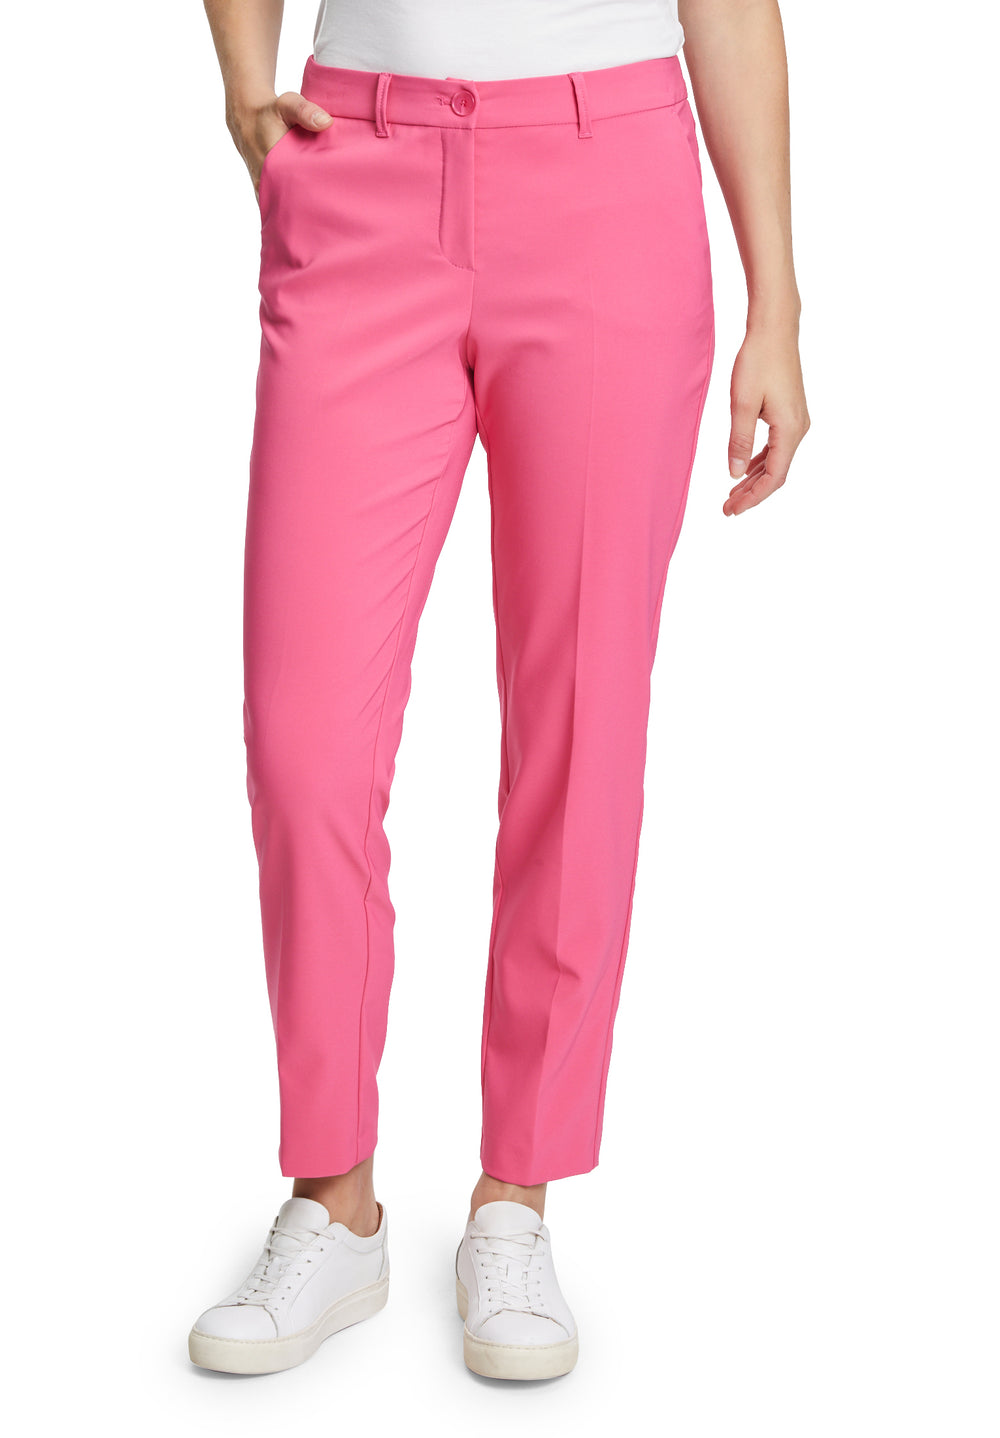 Betty Barclay 6675 1080 Classic 7/8 Length Trouser Pink 2